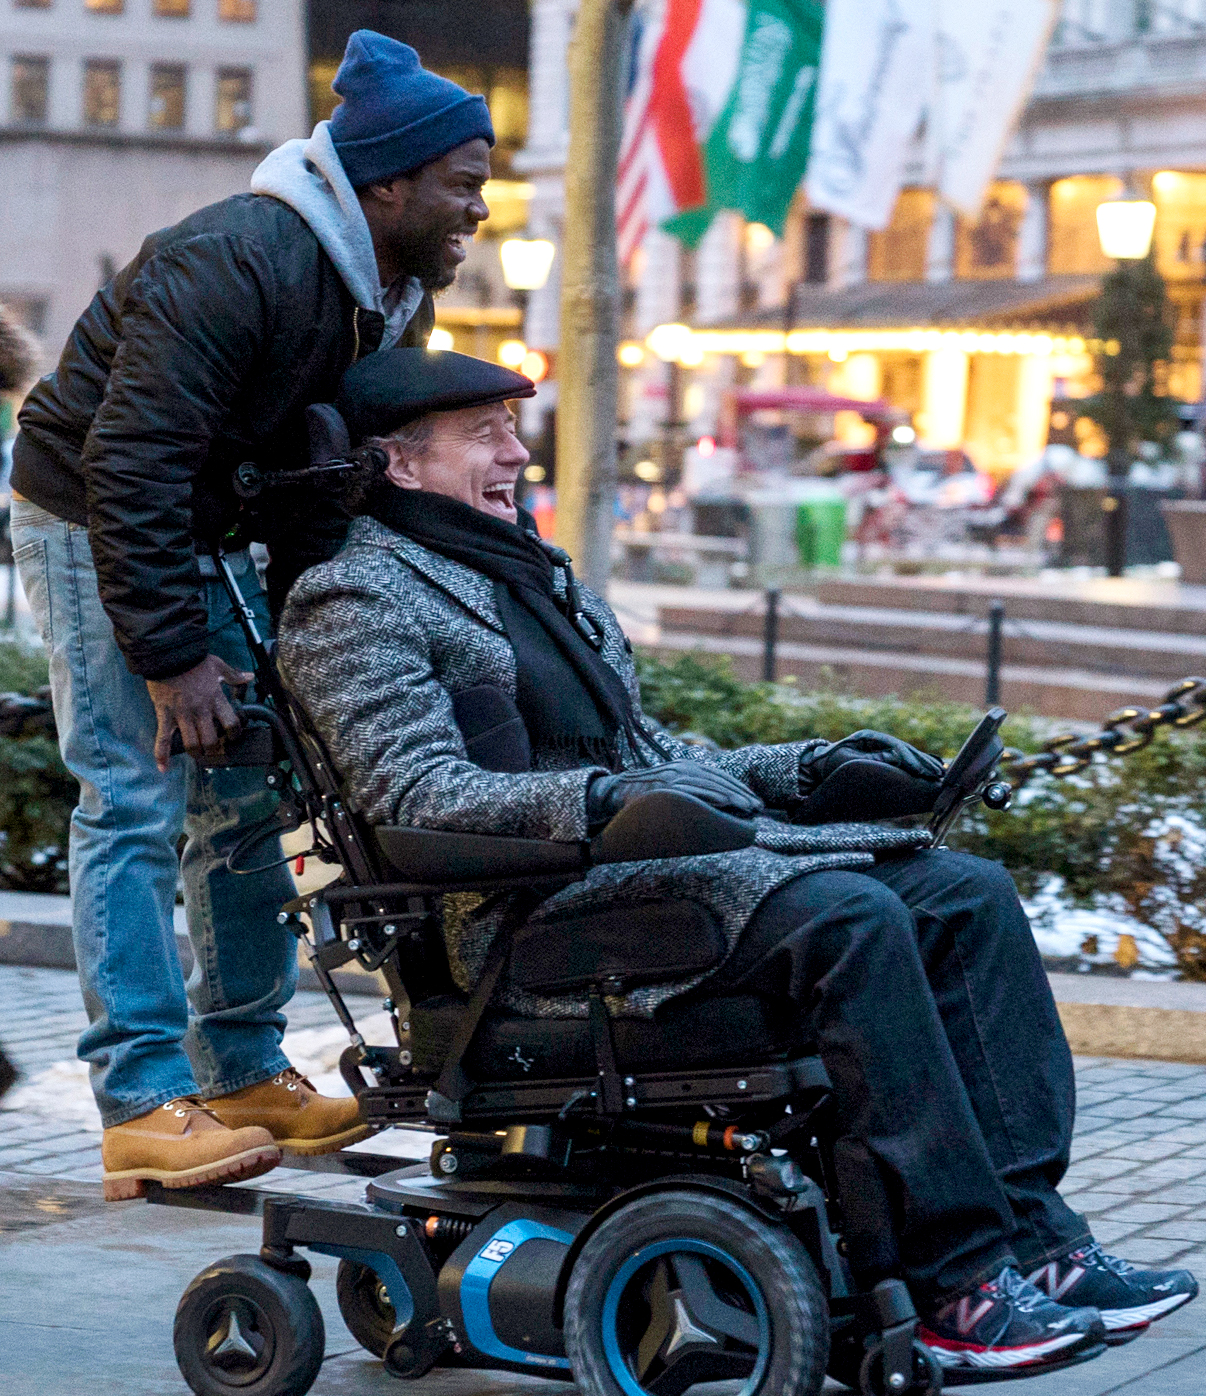 The Upside review: Bryan Cranston and Kevin Hart star in Intouchables movie  remake.